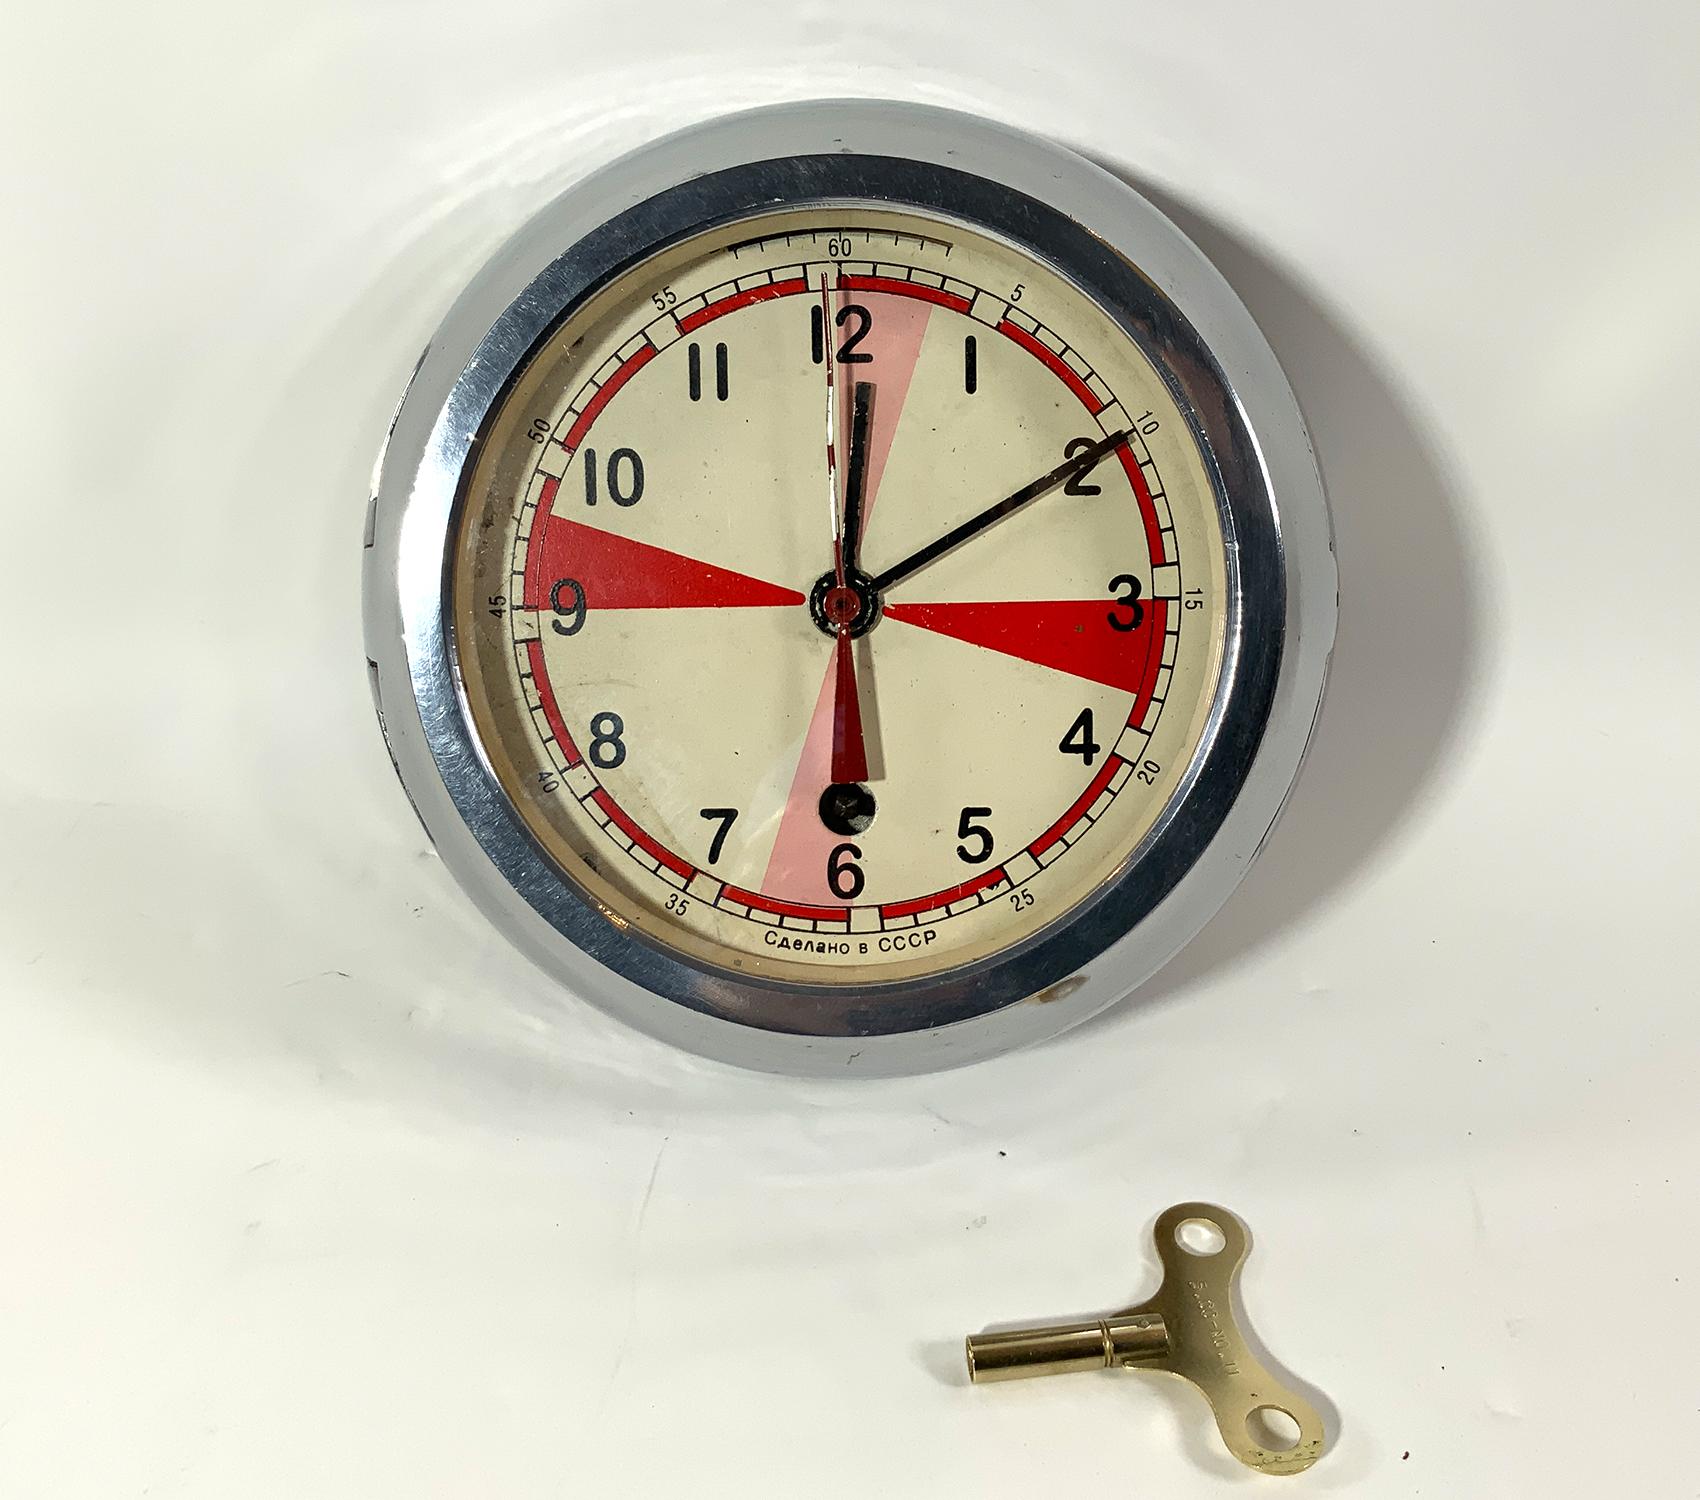 1950's Ships clock of Russian Manufacturing. Hinged door, key included. Clock is running clock case is nickel plated. Circa 1950.